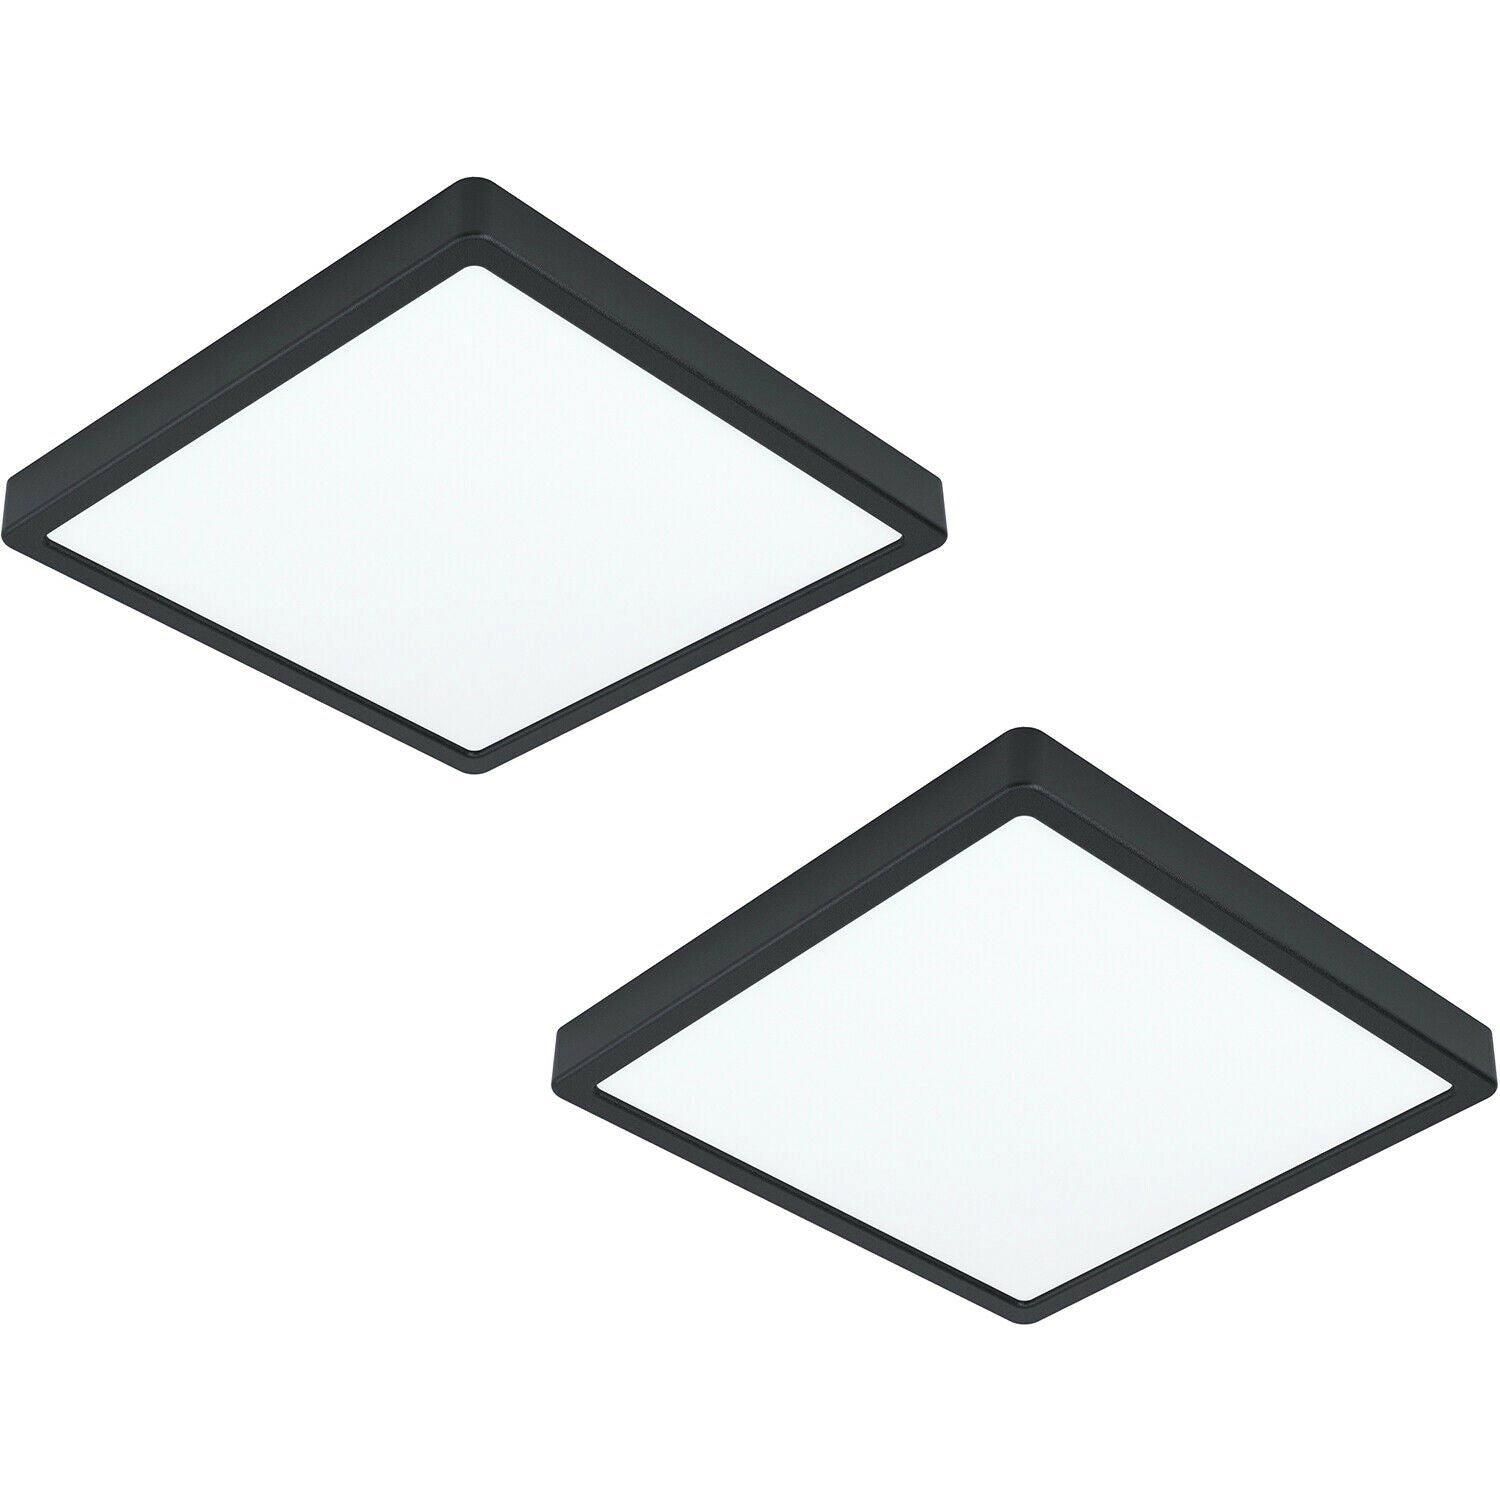 2 PACK Wall / Ceiling Light Black 285mm Square Surface Mounted 20W LED 3000K